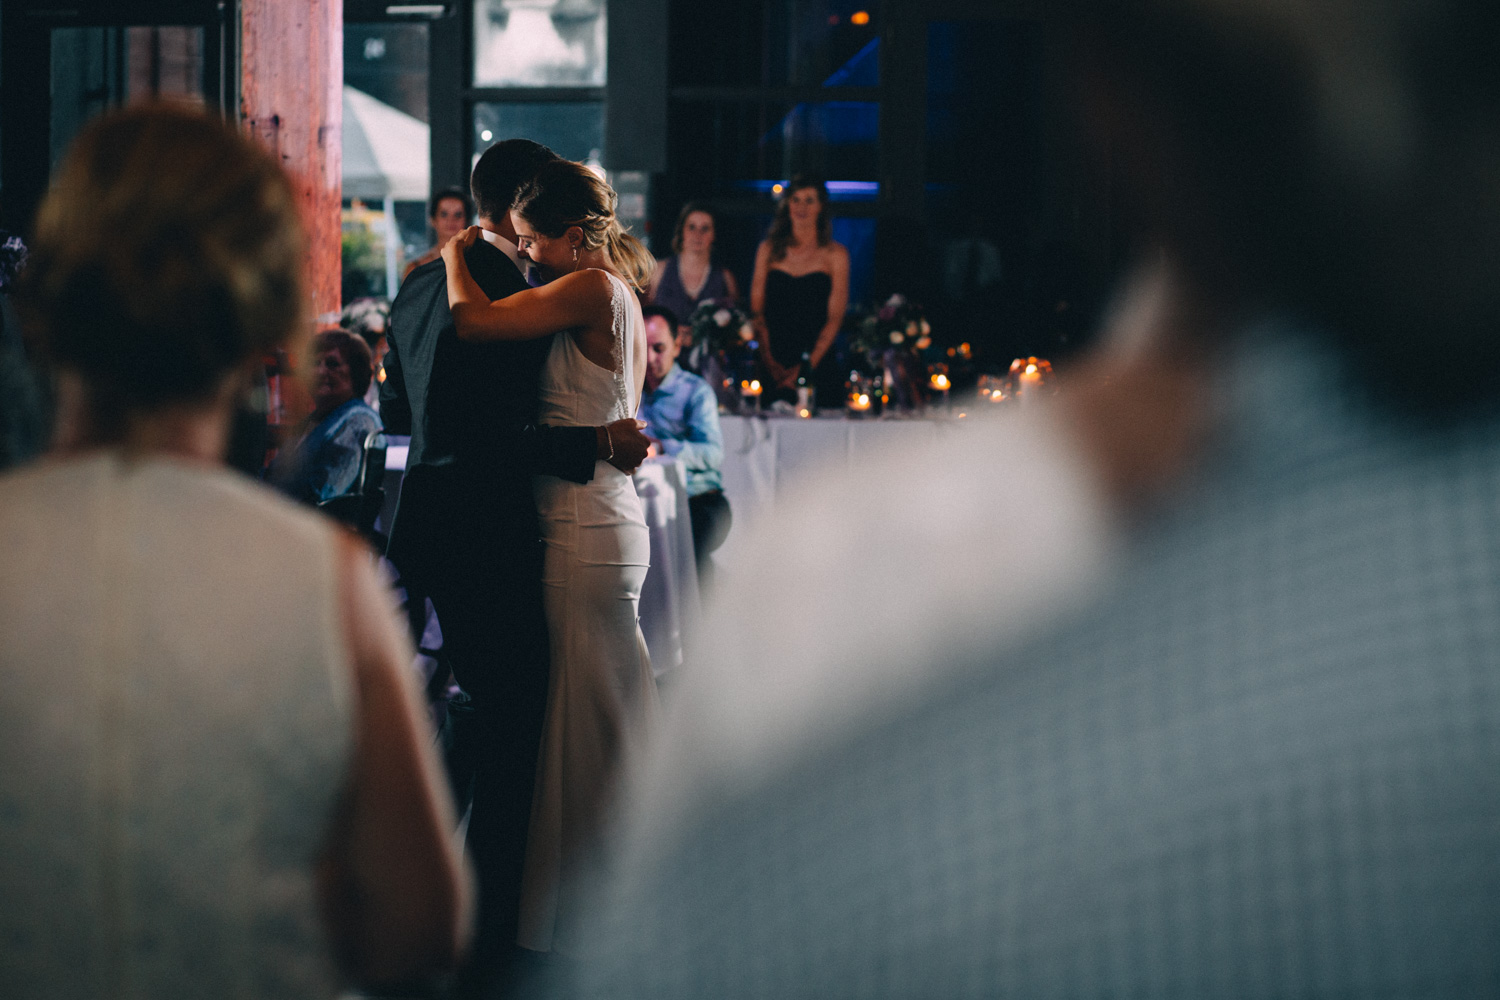 steam-whistle-brewery-wedding-photos-toronto-wedding-photography-by-sam-wong-of-artanis-collective_01051